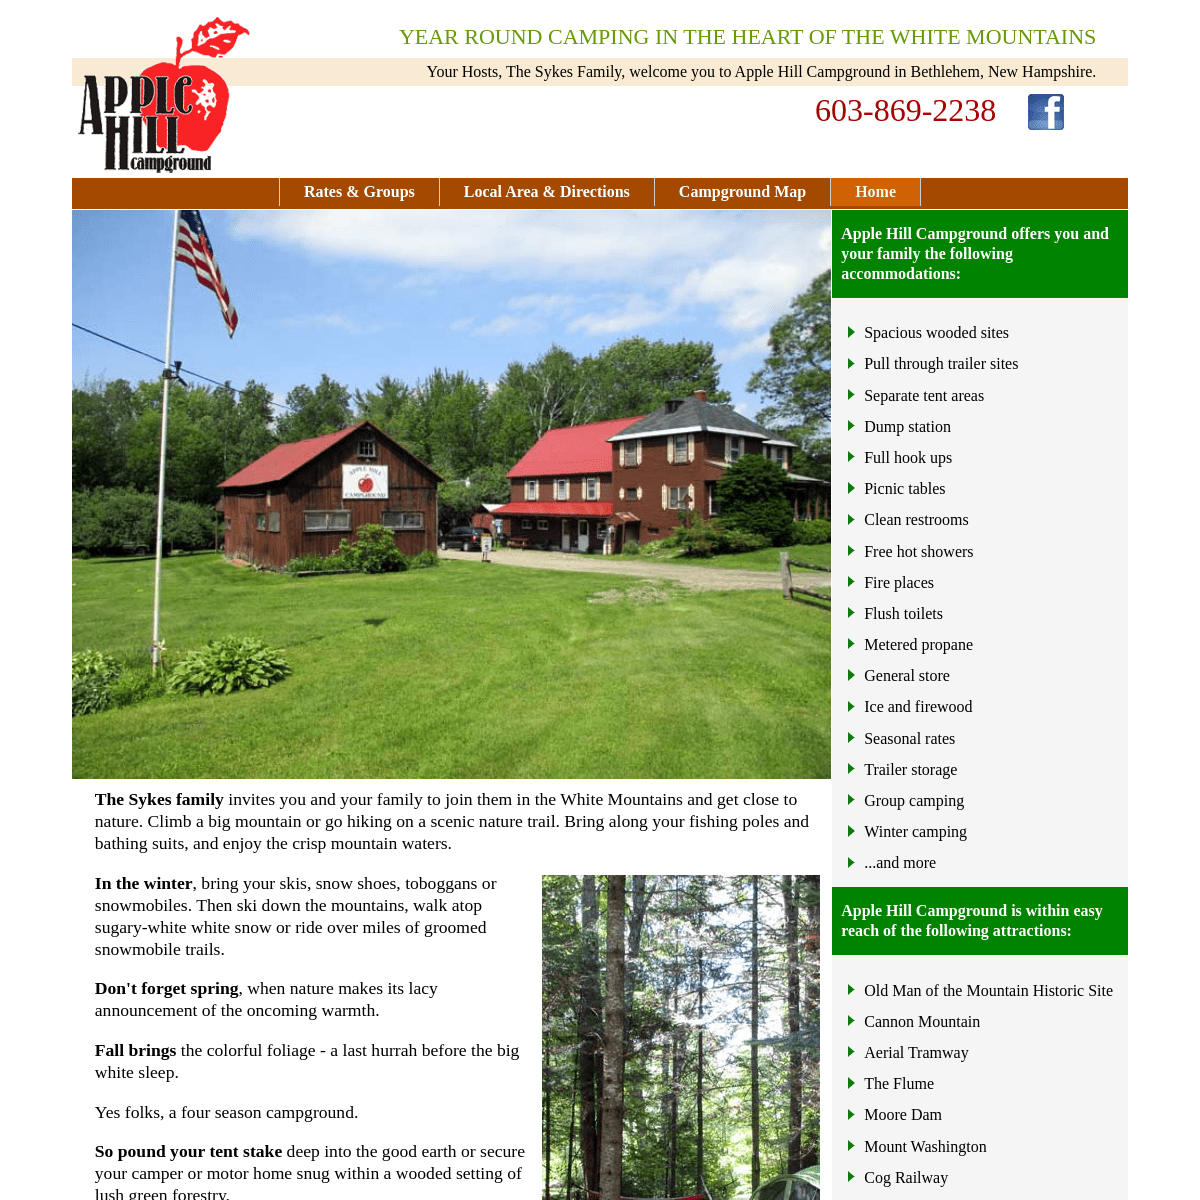 A complete backup of applehillcamping.com